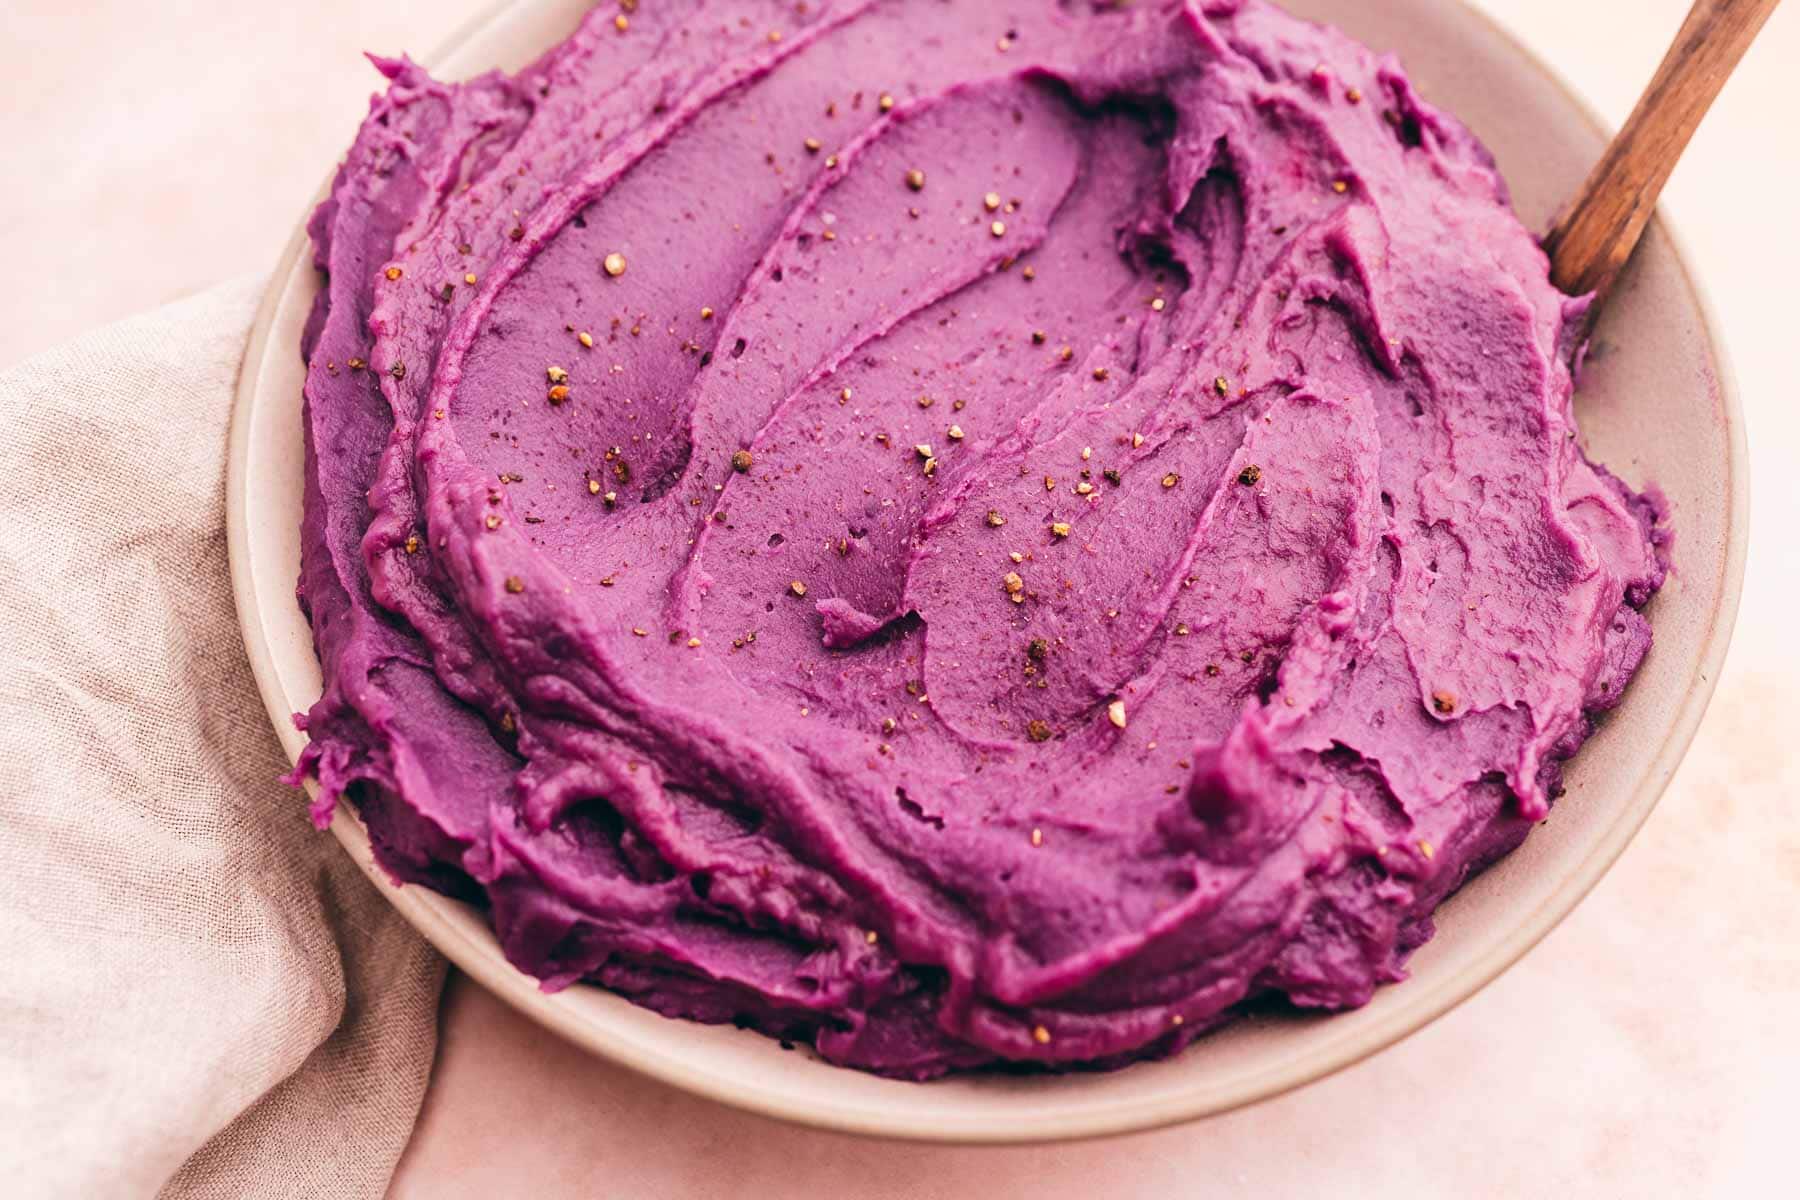 Mashed purple sweet potatoes in a bowl with a wooden spoon.